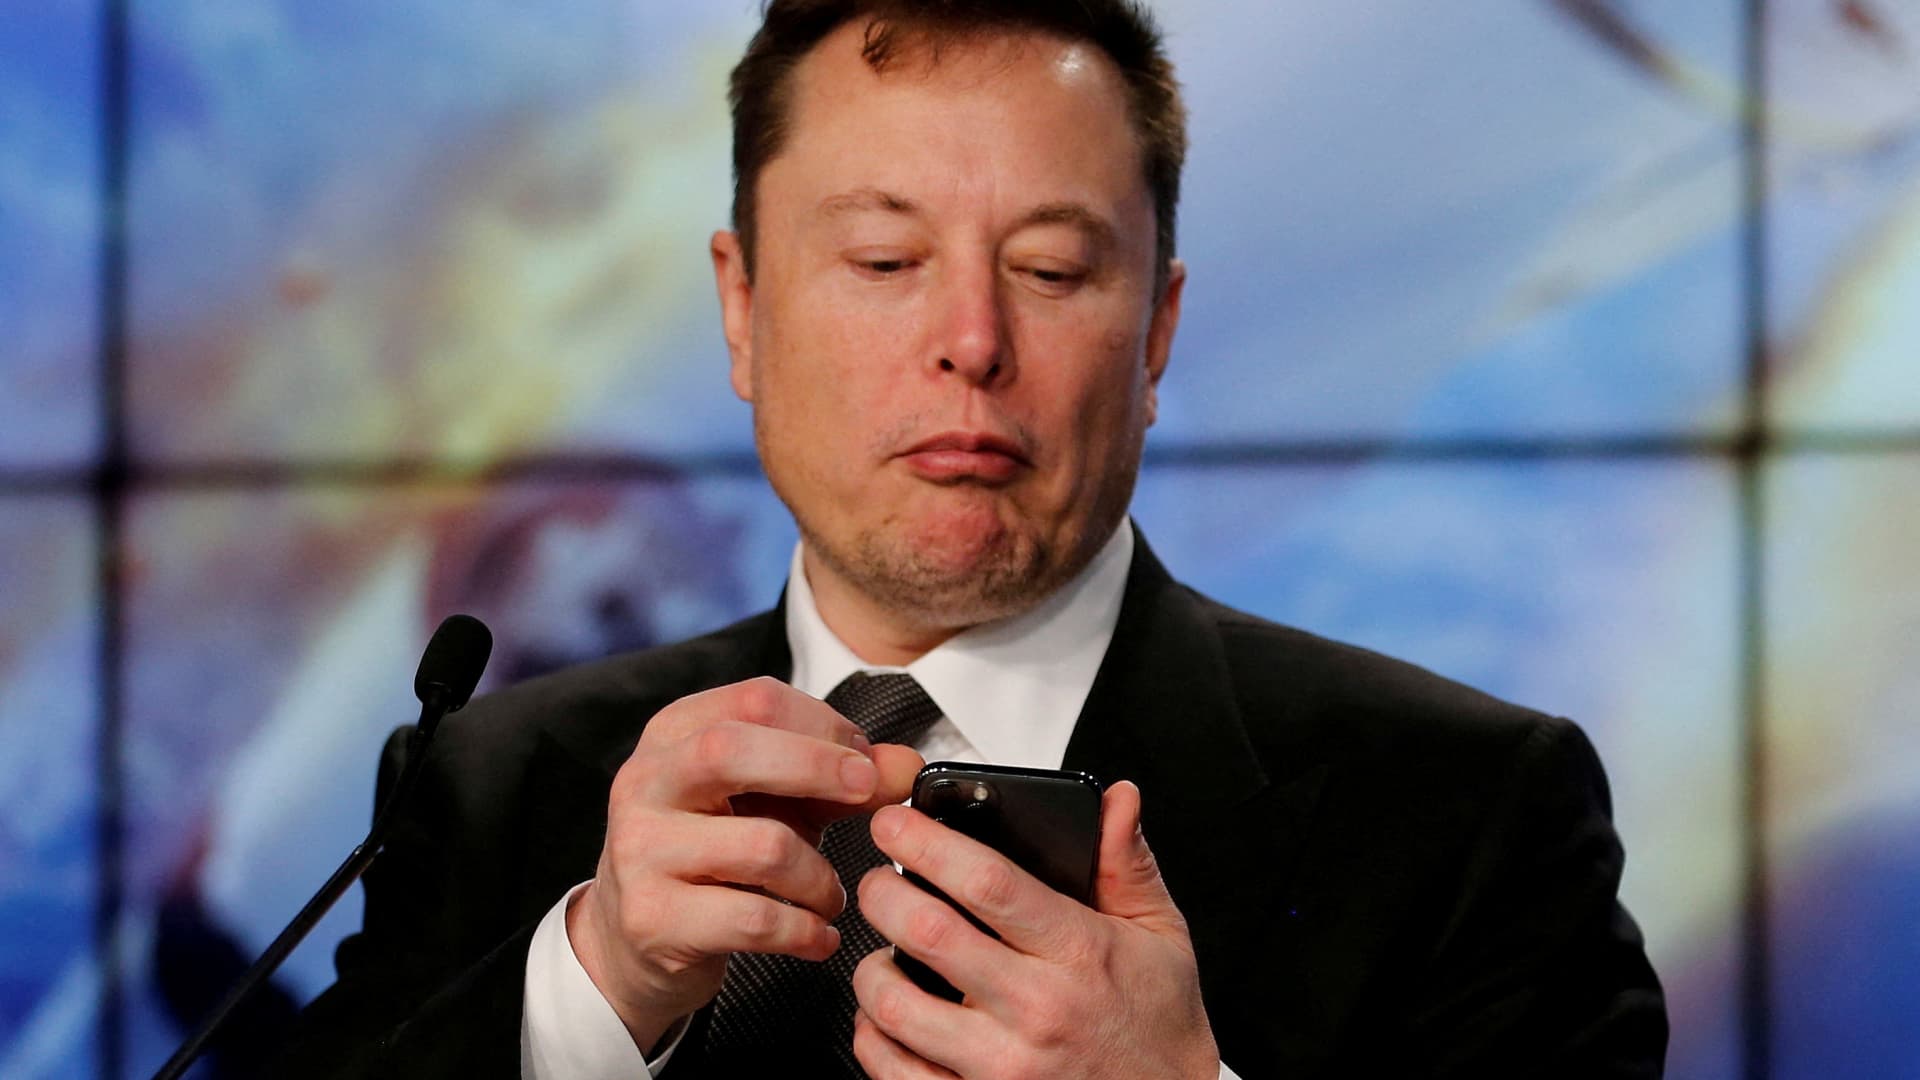 Tesla shares slid nearly 9% on demand concerns, Elon Musk’s Twitter distraction Auto Recent